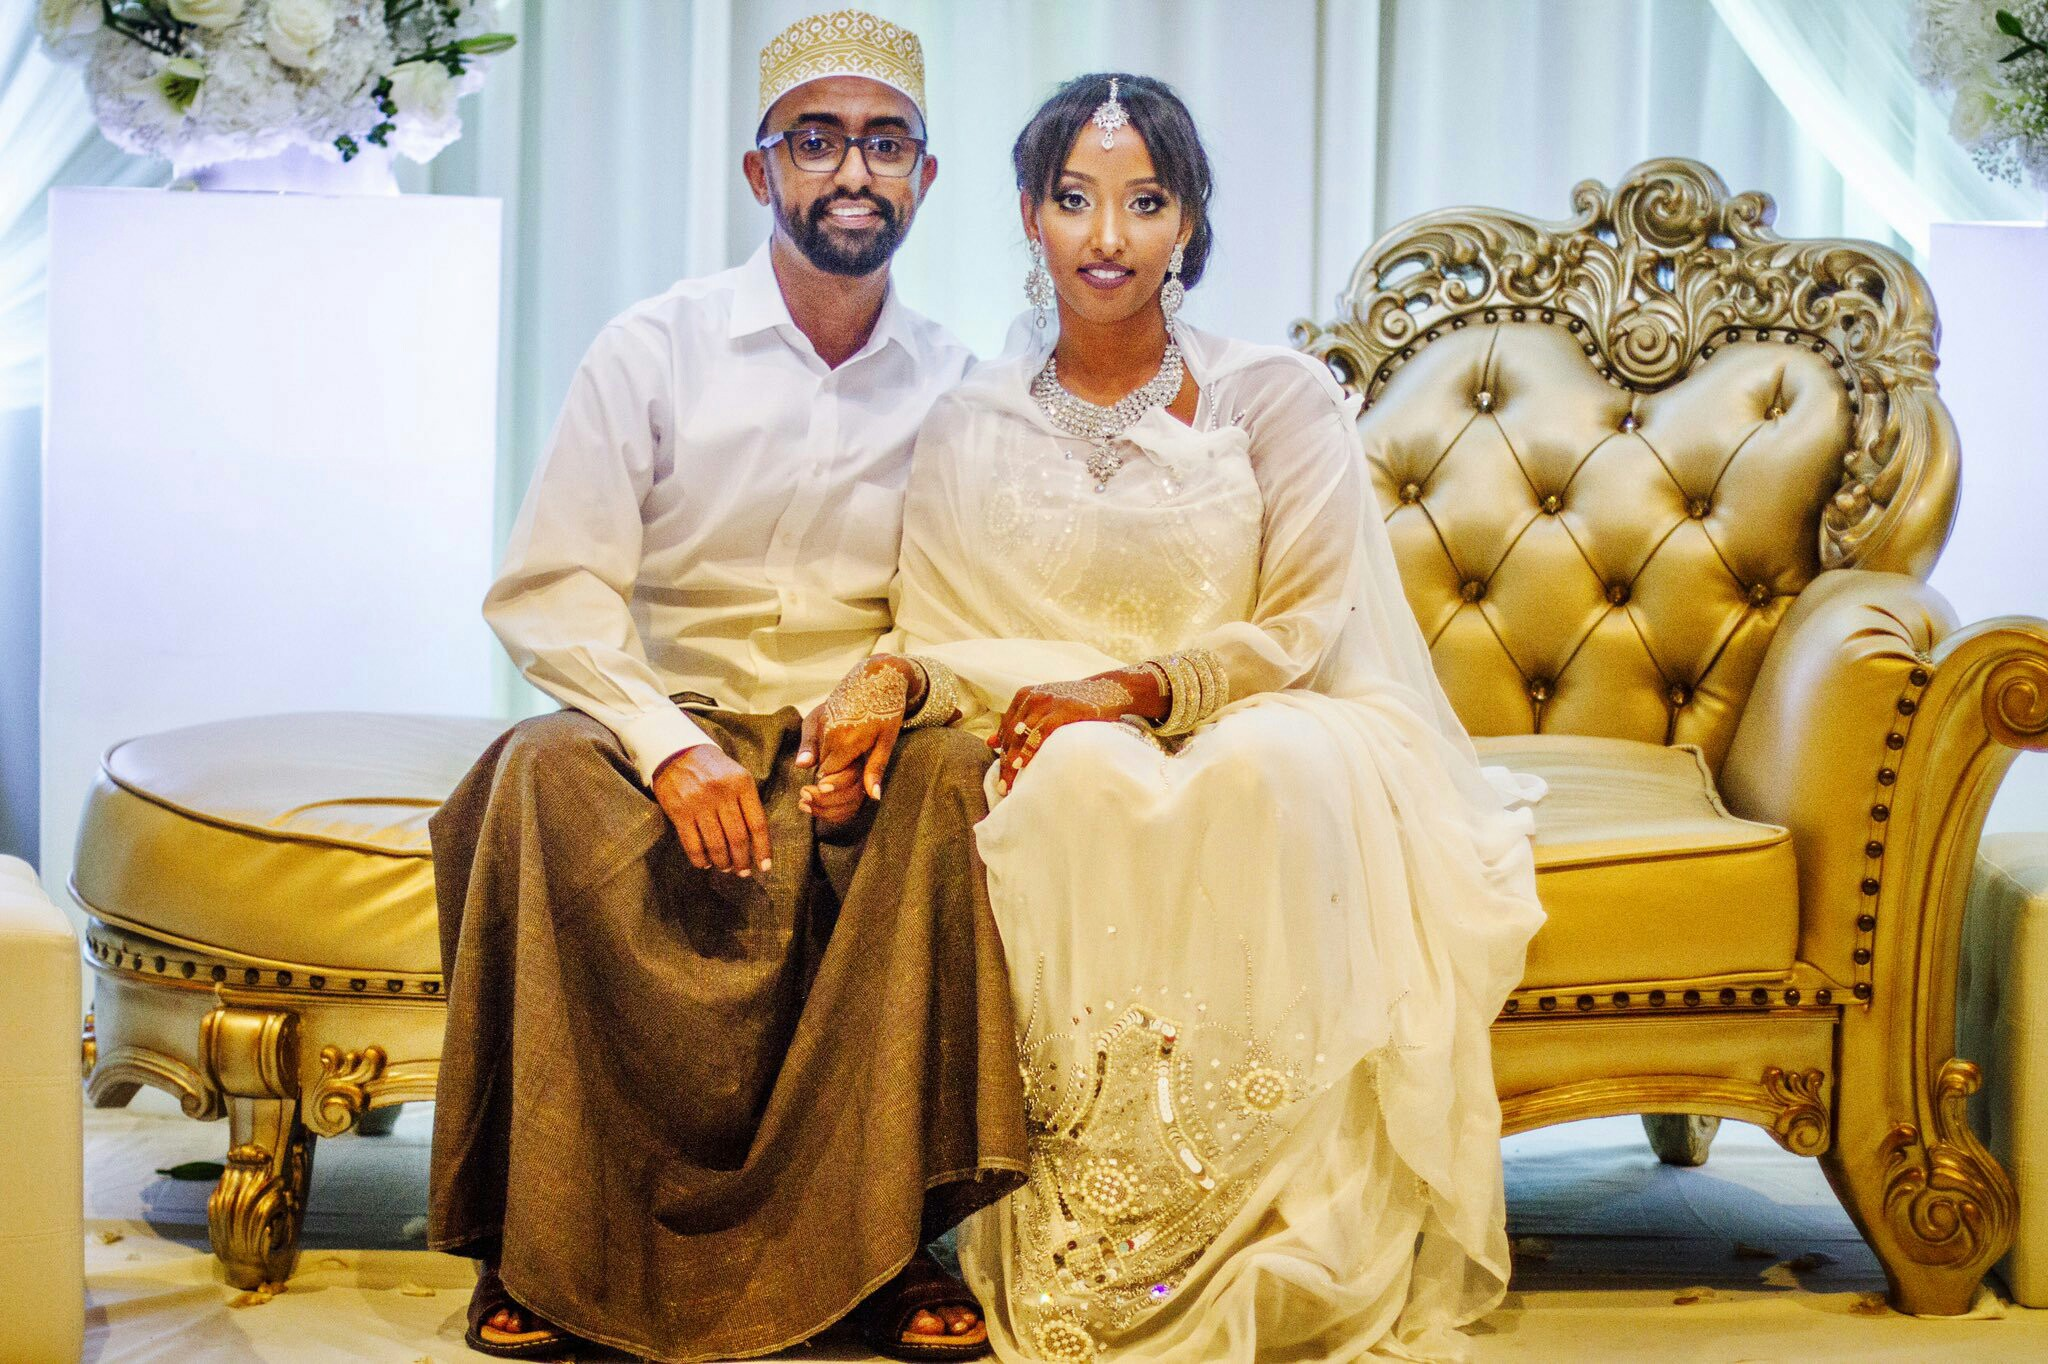 Traditions somali marriage Cultures and